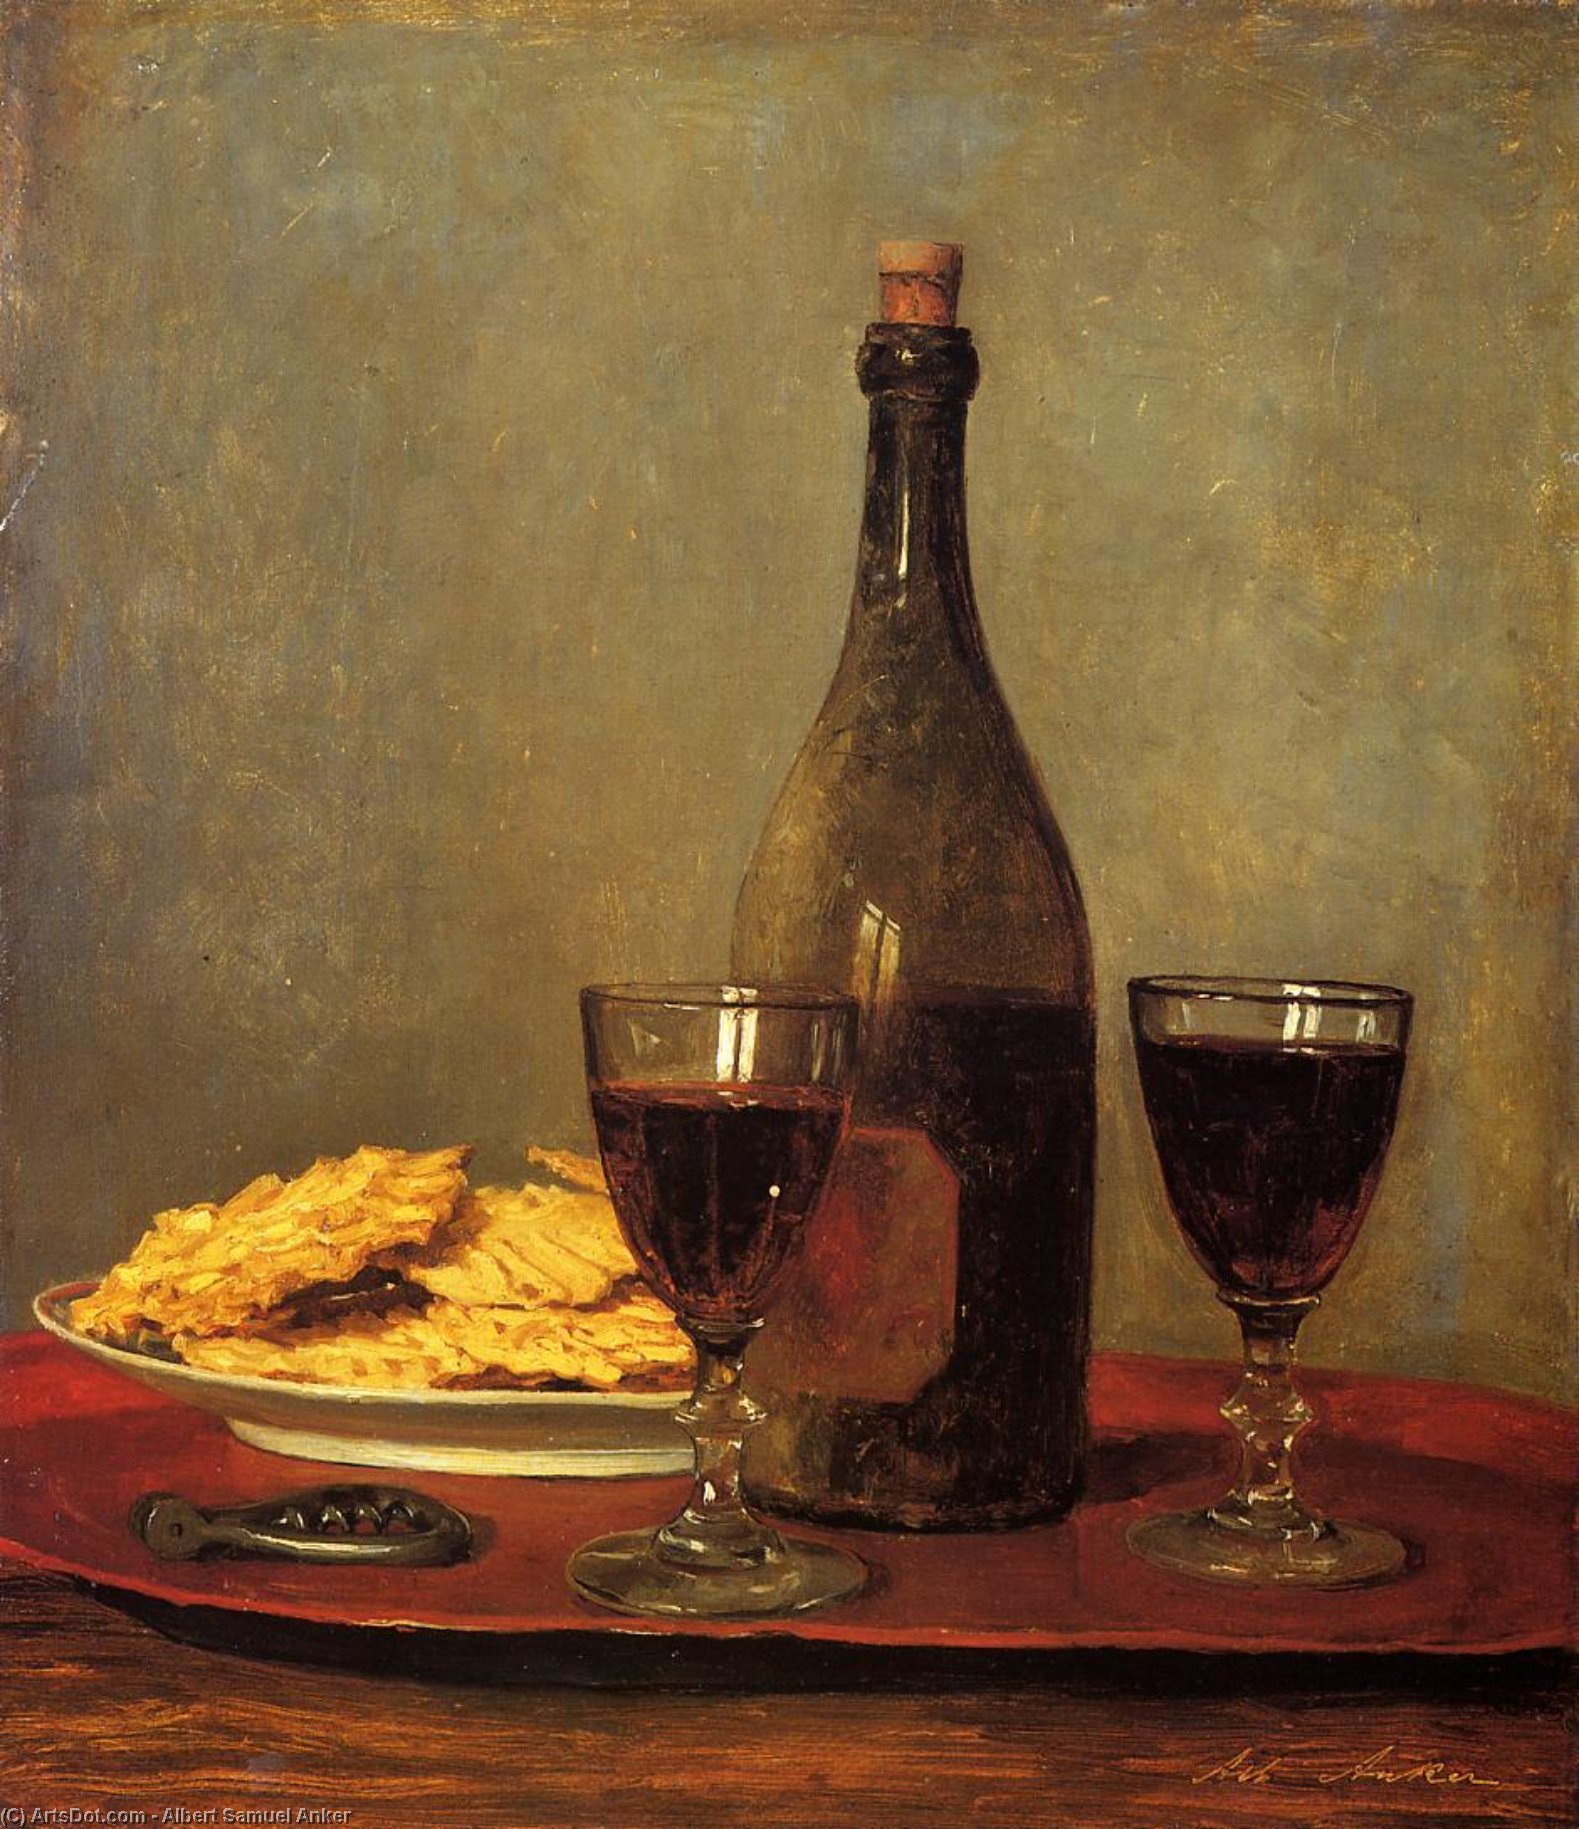 Order Paintings Reproductions Still Life: Two Glass of Red Wine, a Bottle of Wine, a Corkscrew and a Plate of Biscuits on a Tray by Albert Samuel Anker (1831-1910, Switzerland) | ArtsDot.com